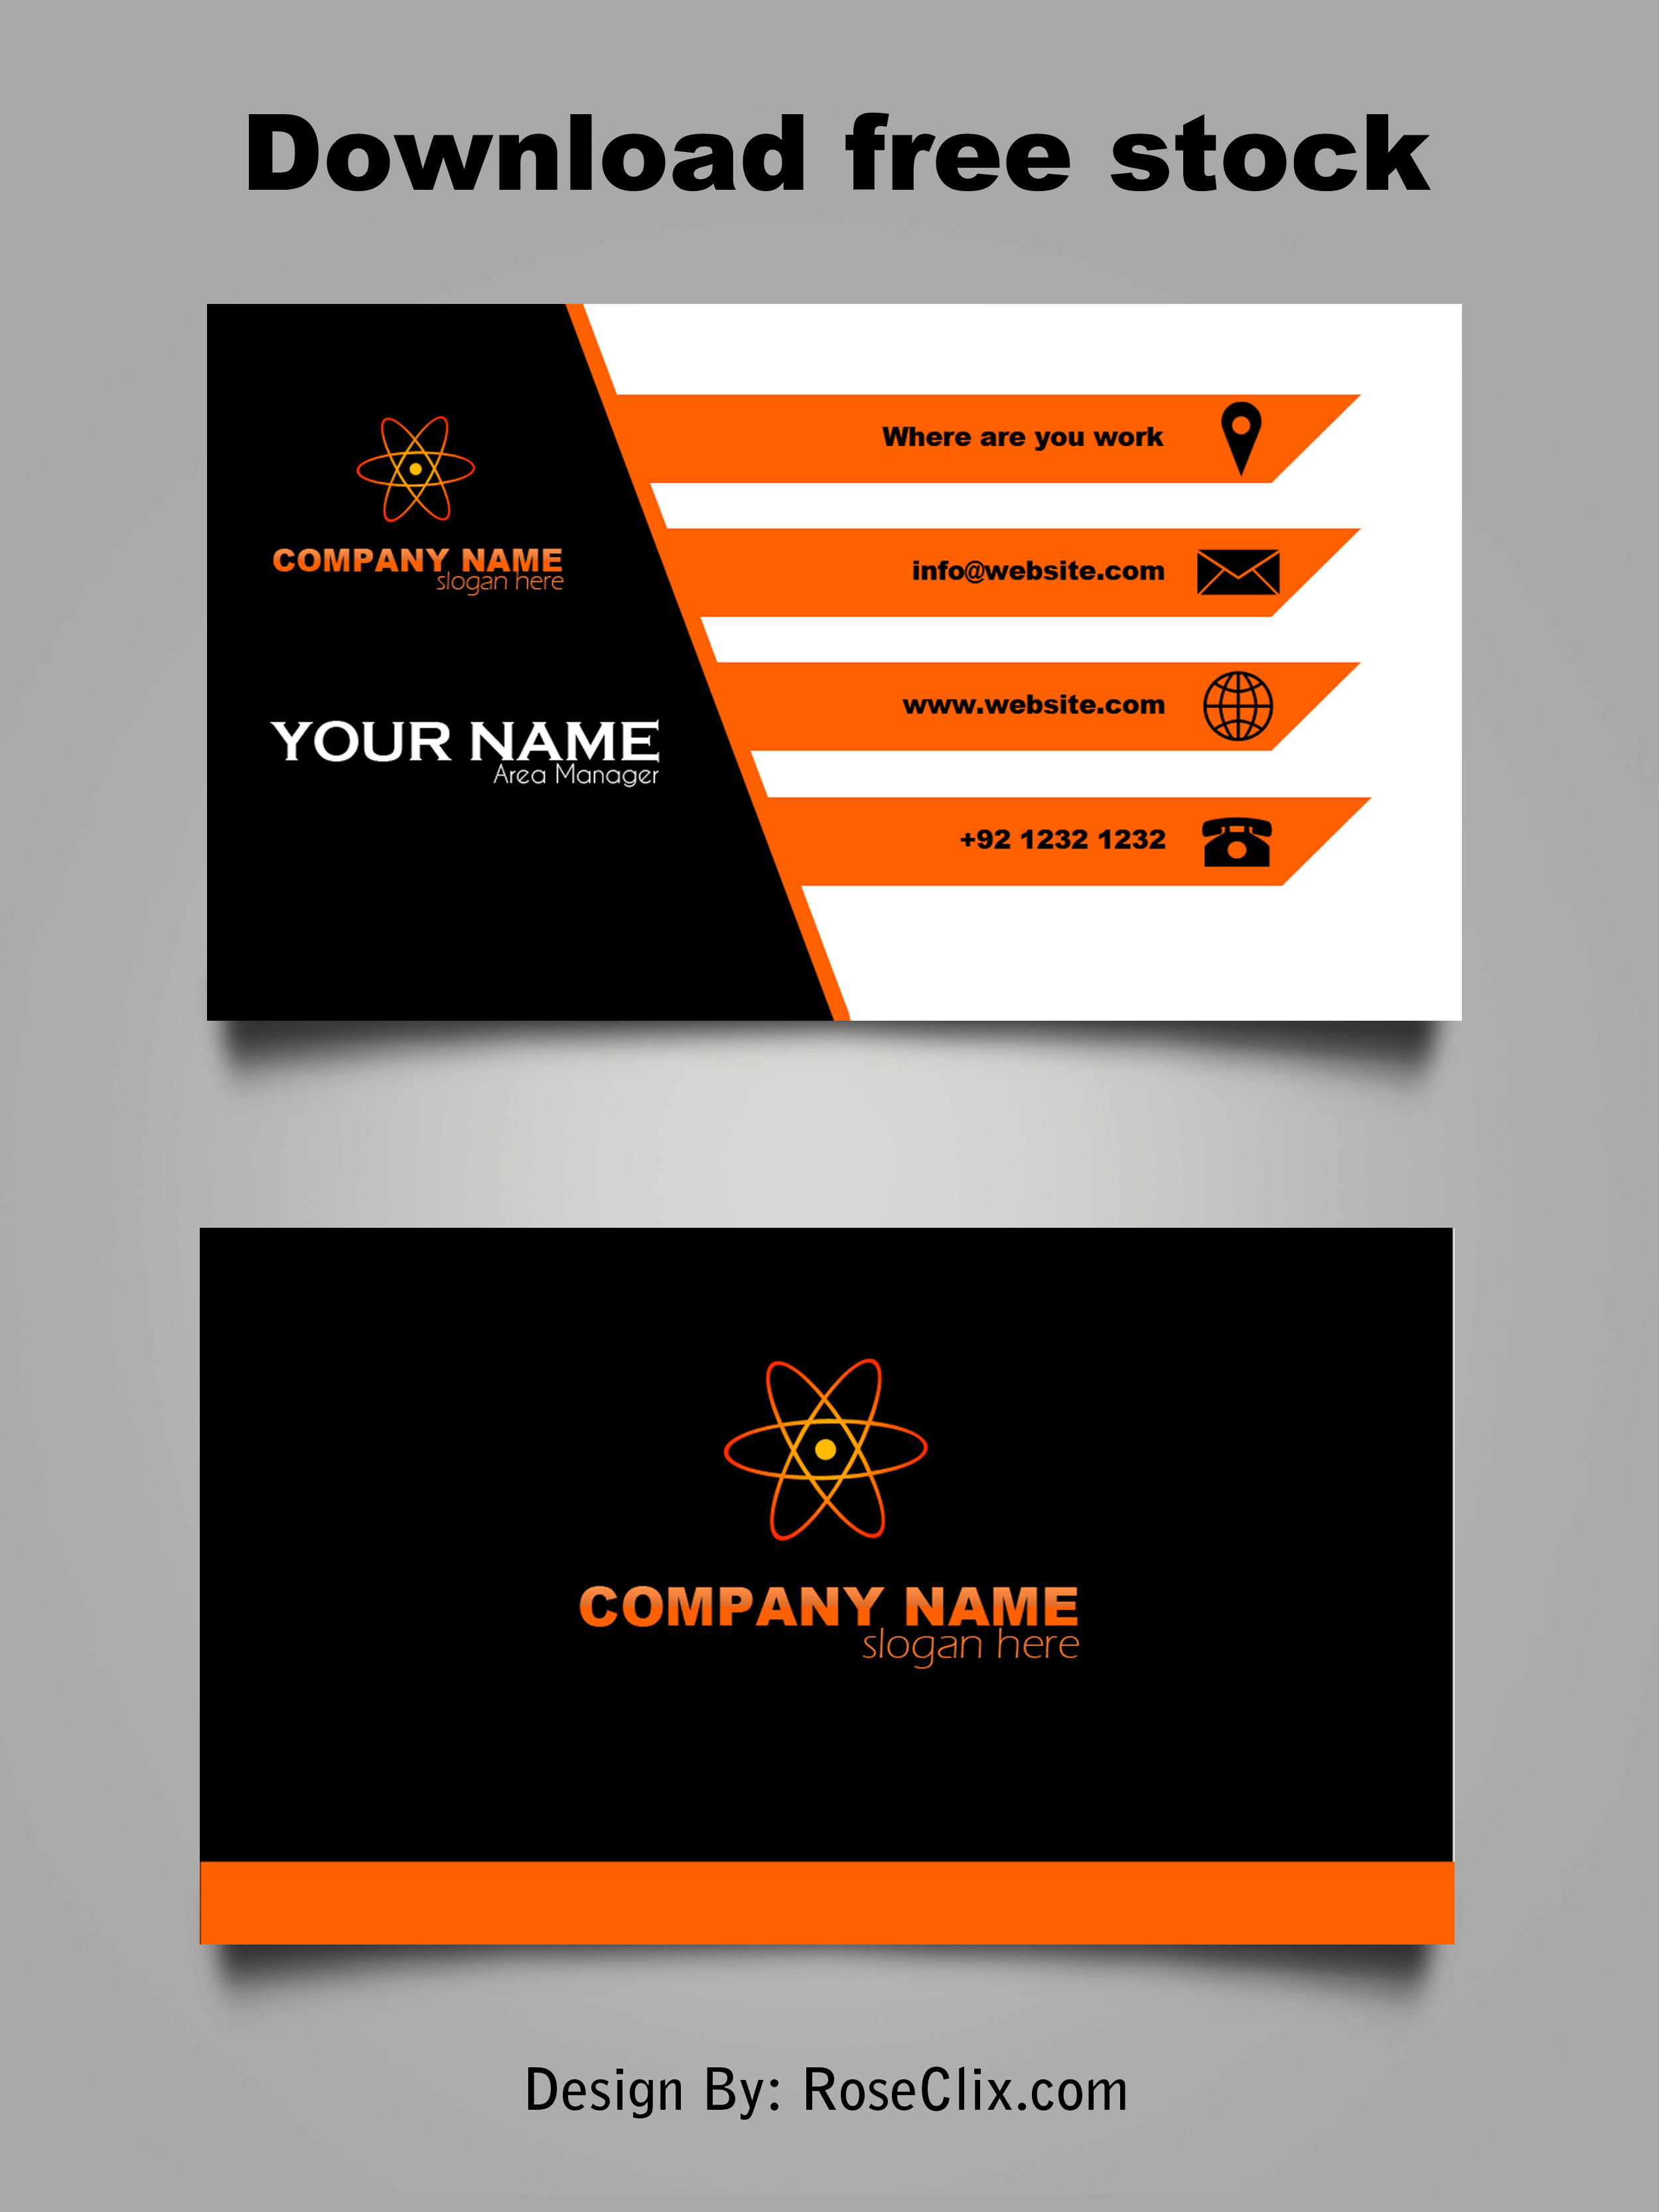 New Business Card Template Powerpoint Free Of Business Card Template Powerpoint Free